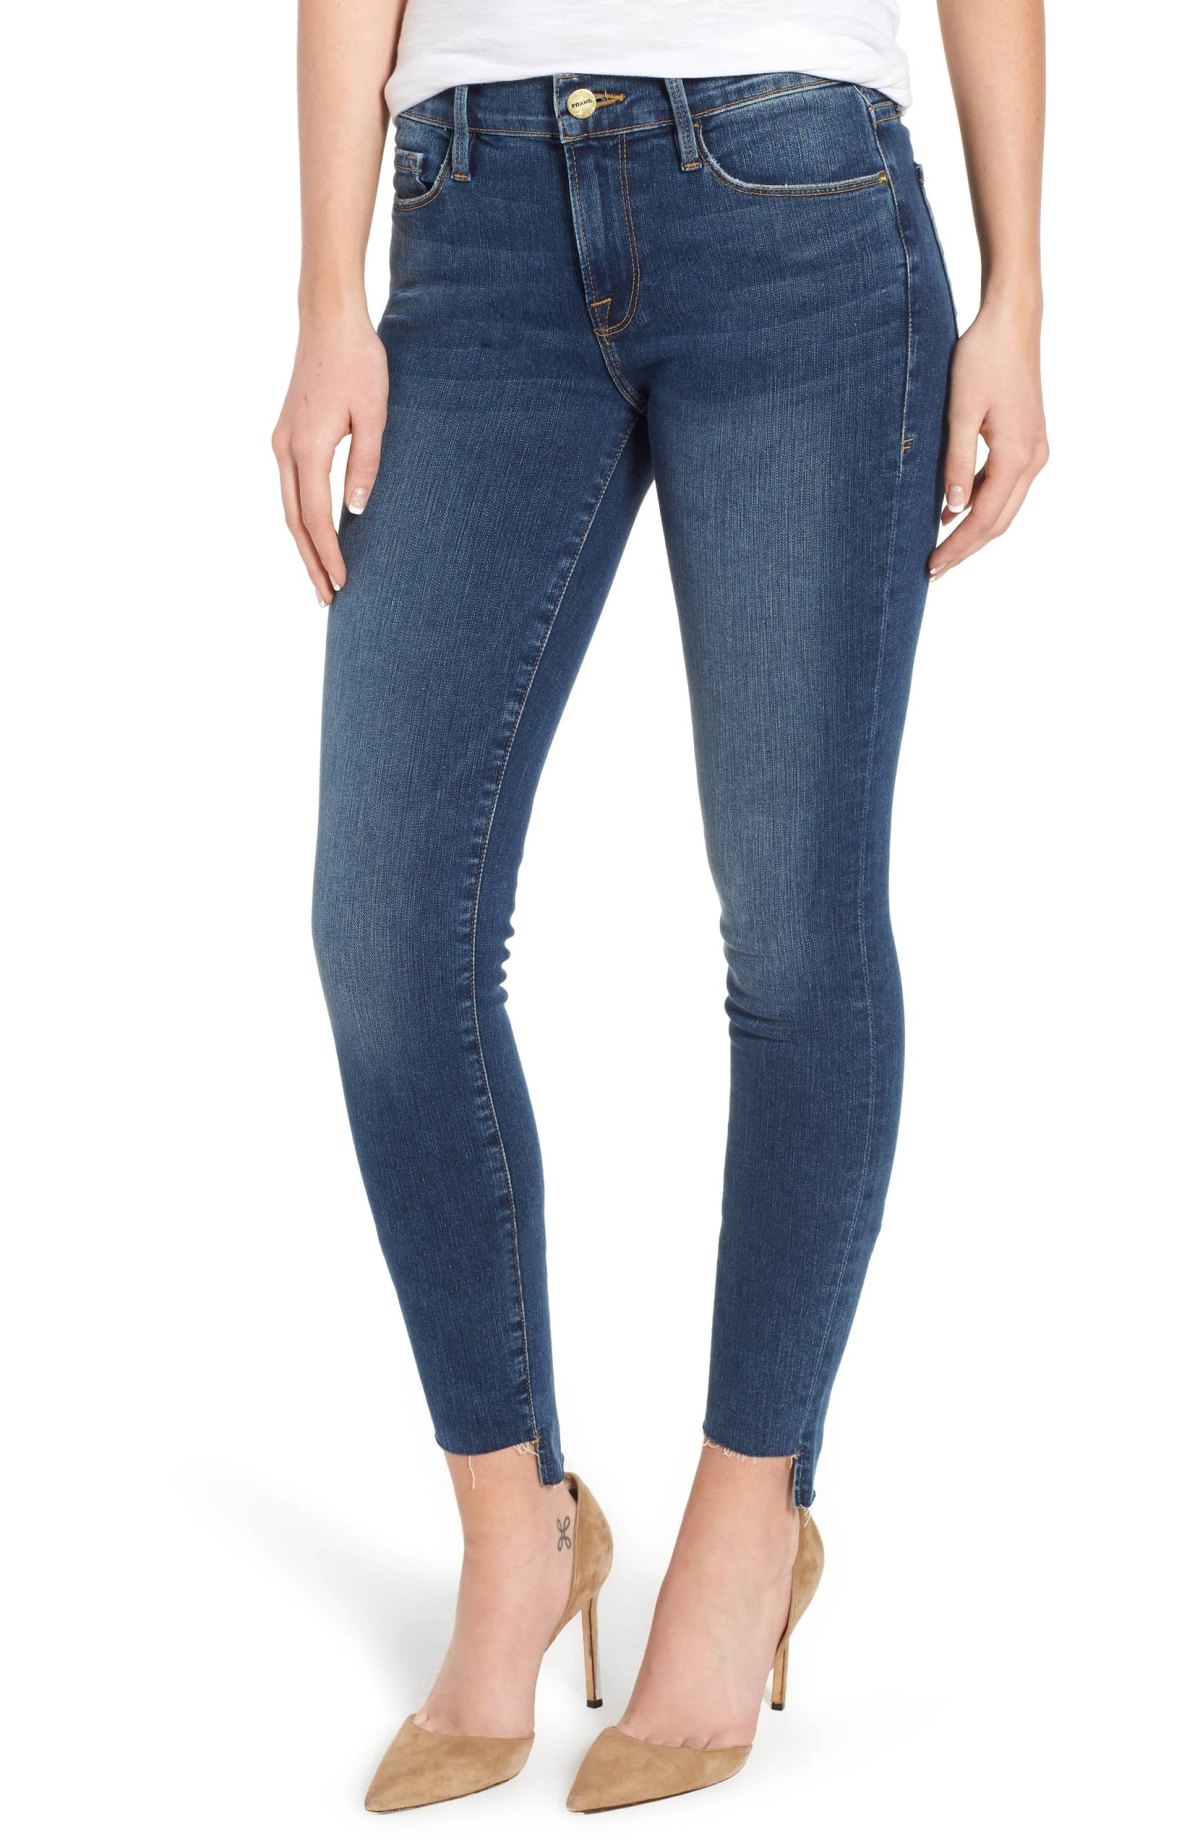 Nordstrom Sale: Shop These Frame Skinny Jeans | Us Weekly